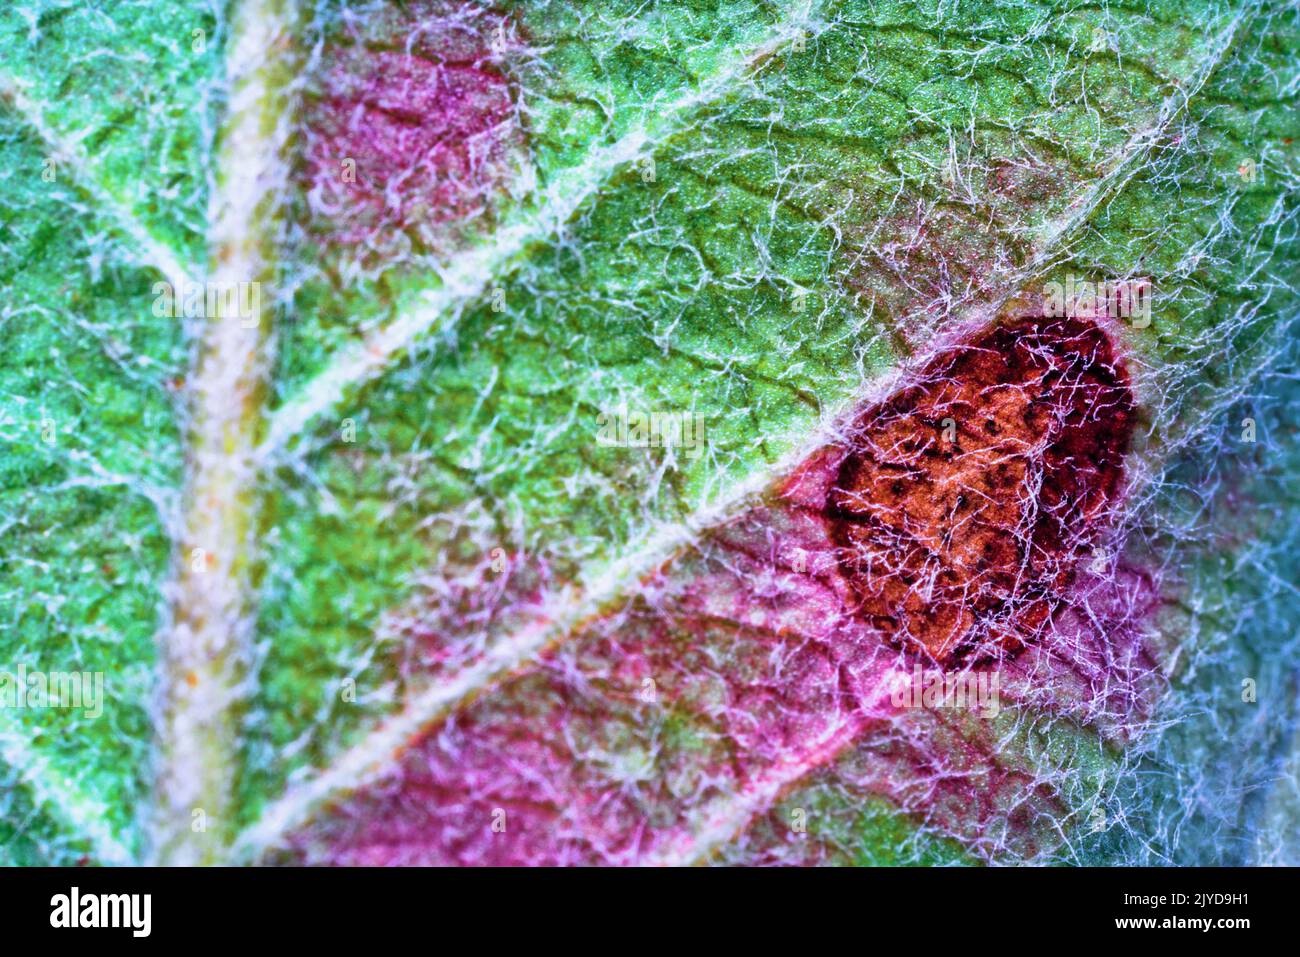 Phytopathology. Broun spotting of apple leaves (ascochytosis, Ascochyta blight) plant disease is caused by fungi of the genus Ascochyta. Ultra-macro Stock Photo